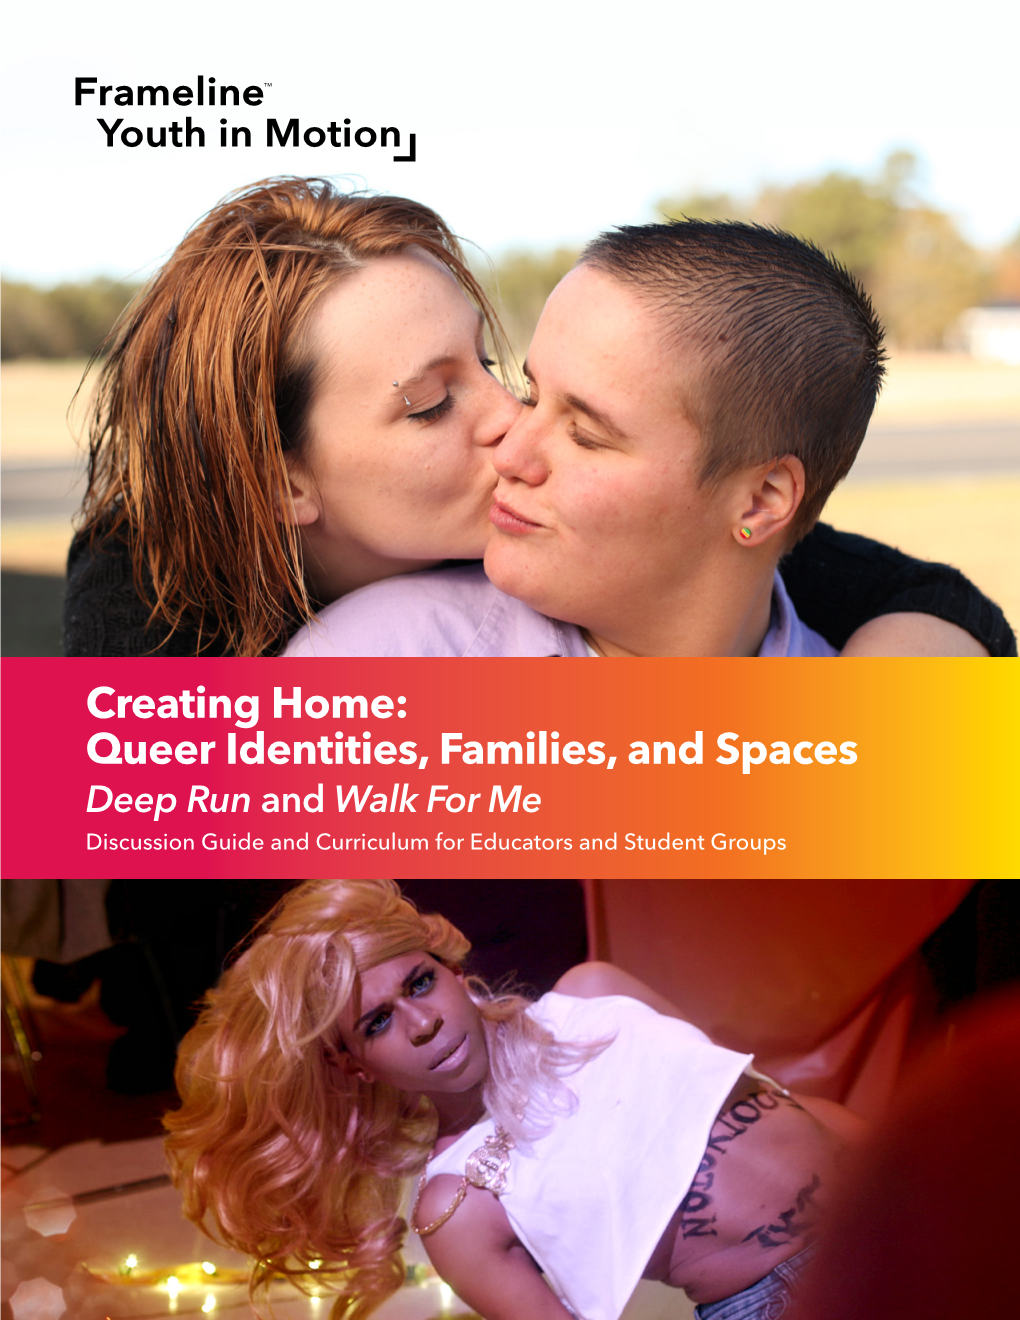 Walk for Me Curriculum and Discussion Guide